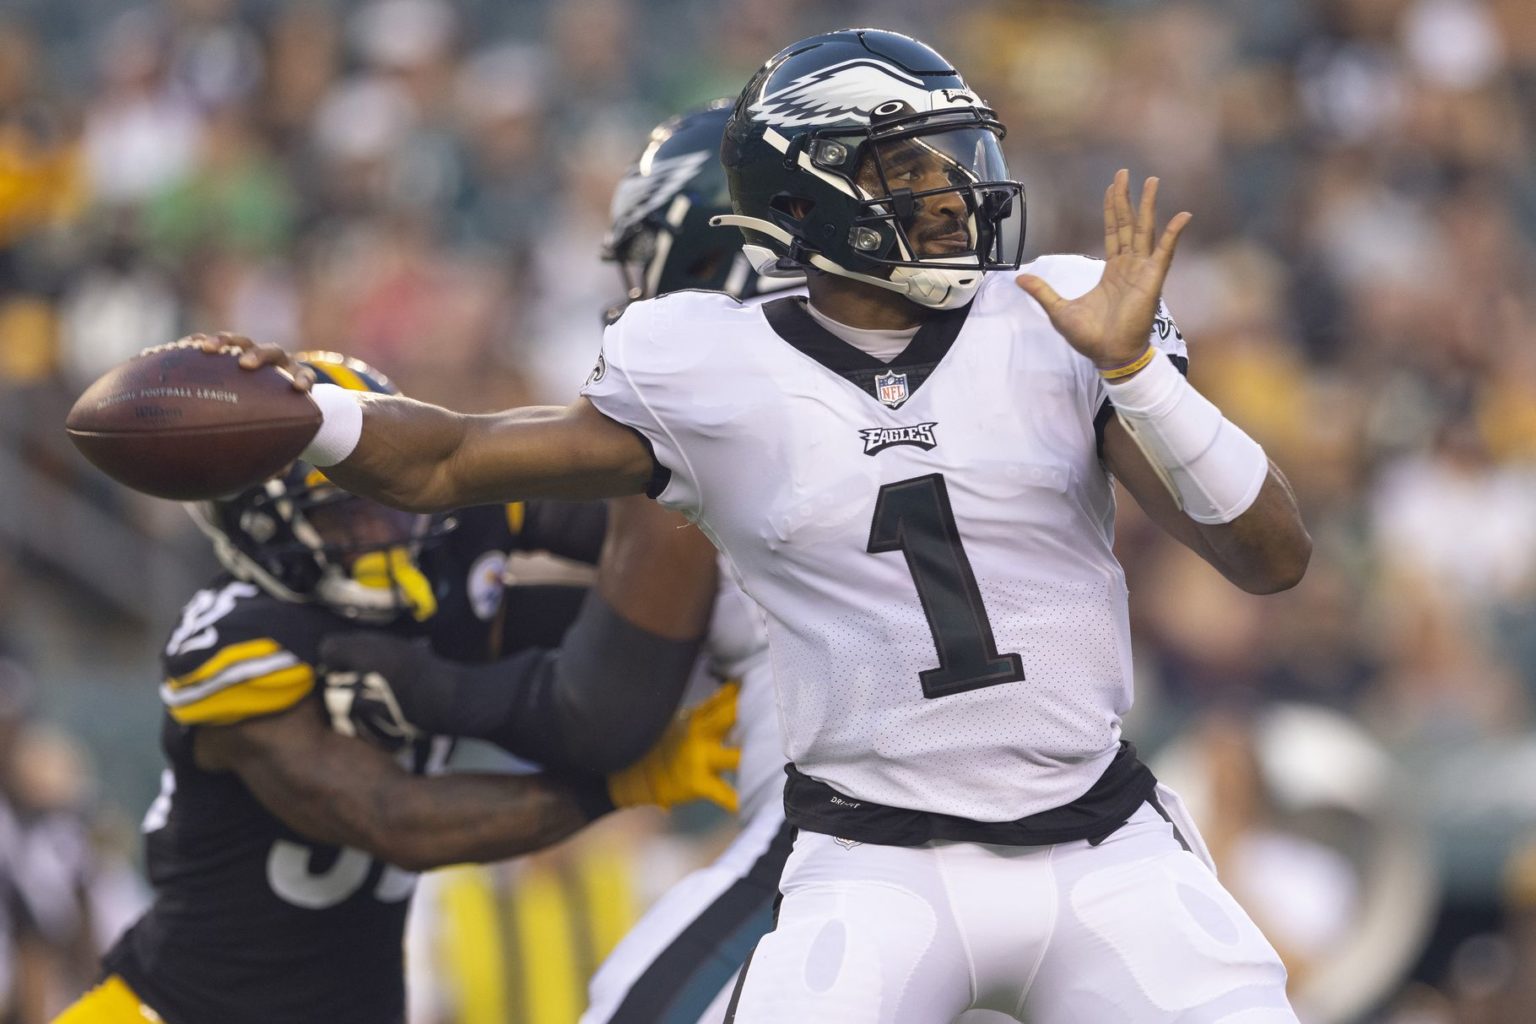 Pros and cons for the Eagles first preseason game against the Steelers